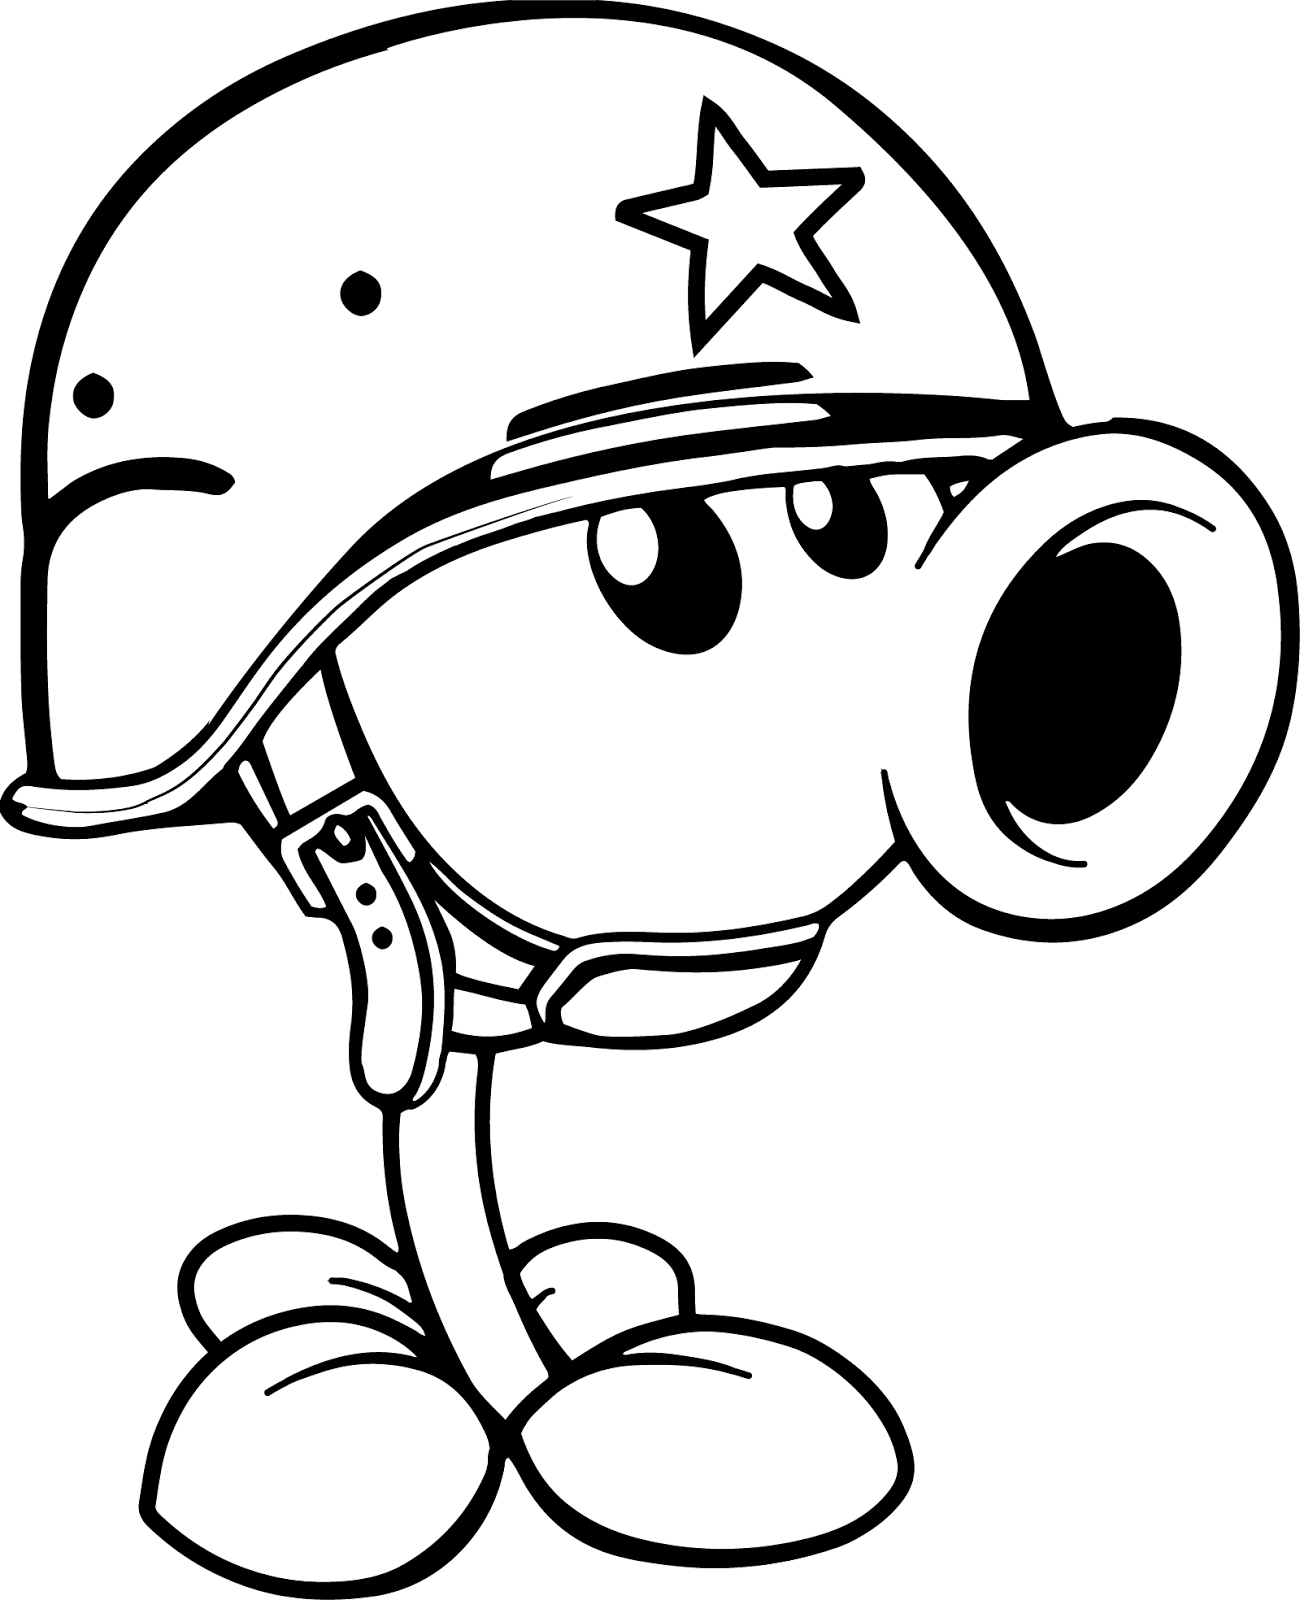 Gatling Pea Plants Vs Zombies Coloring Pages